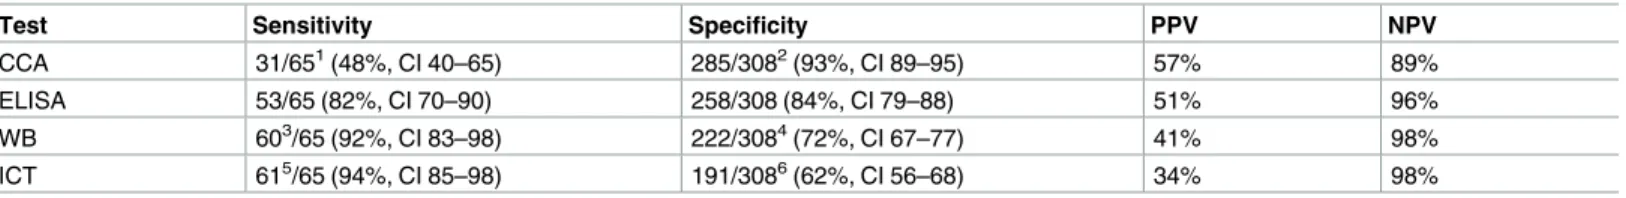 Table 1. Accuracy and predictive values using microscopy as the gold standard (prevalence 65/373 = 17.4%).